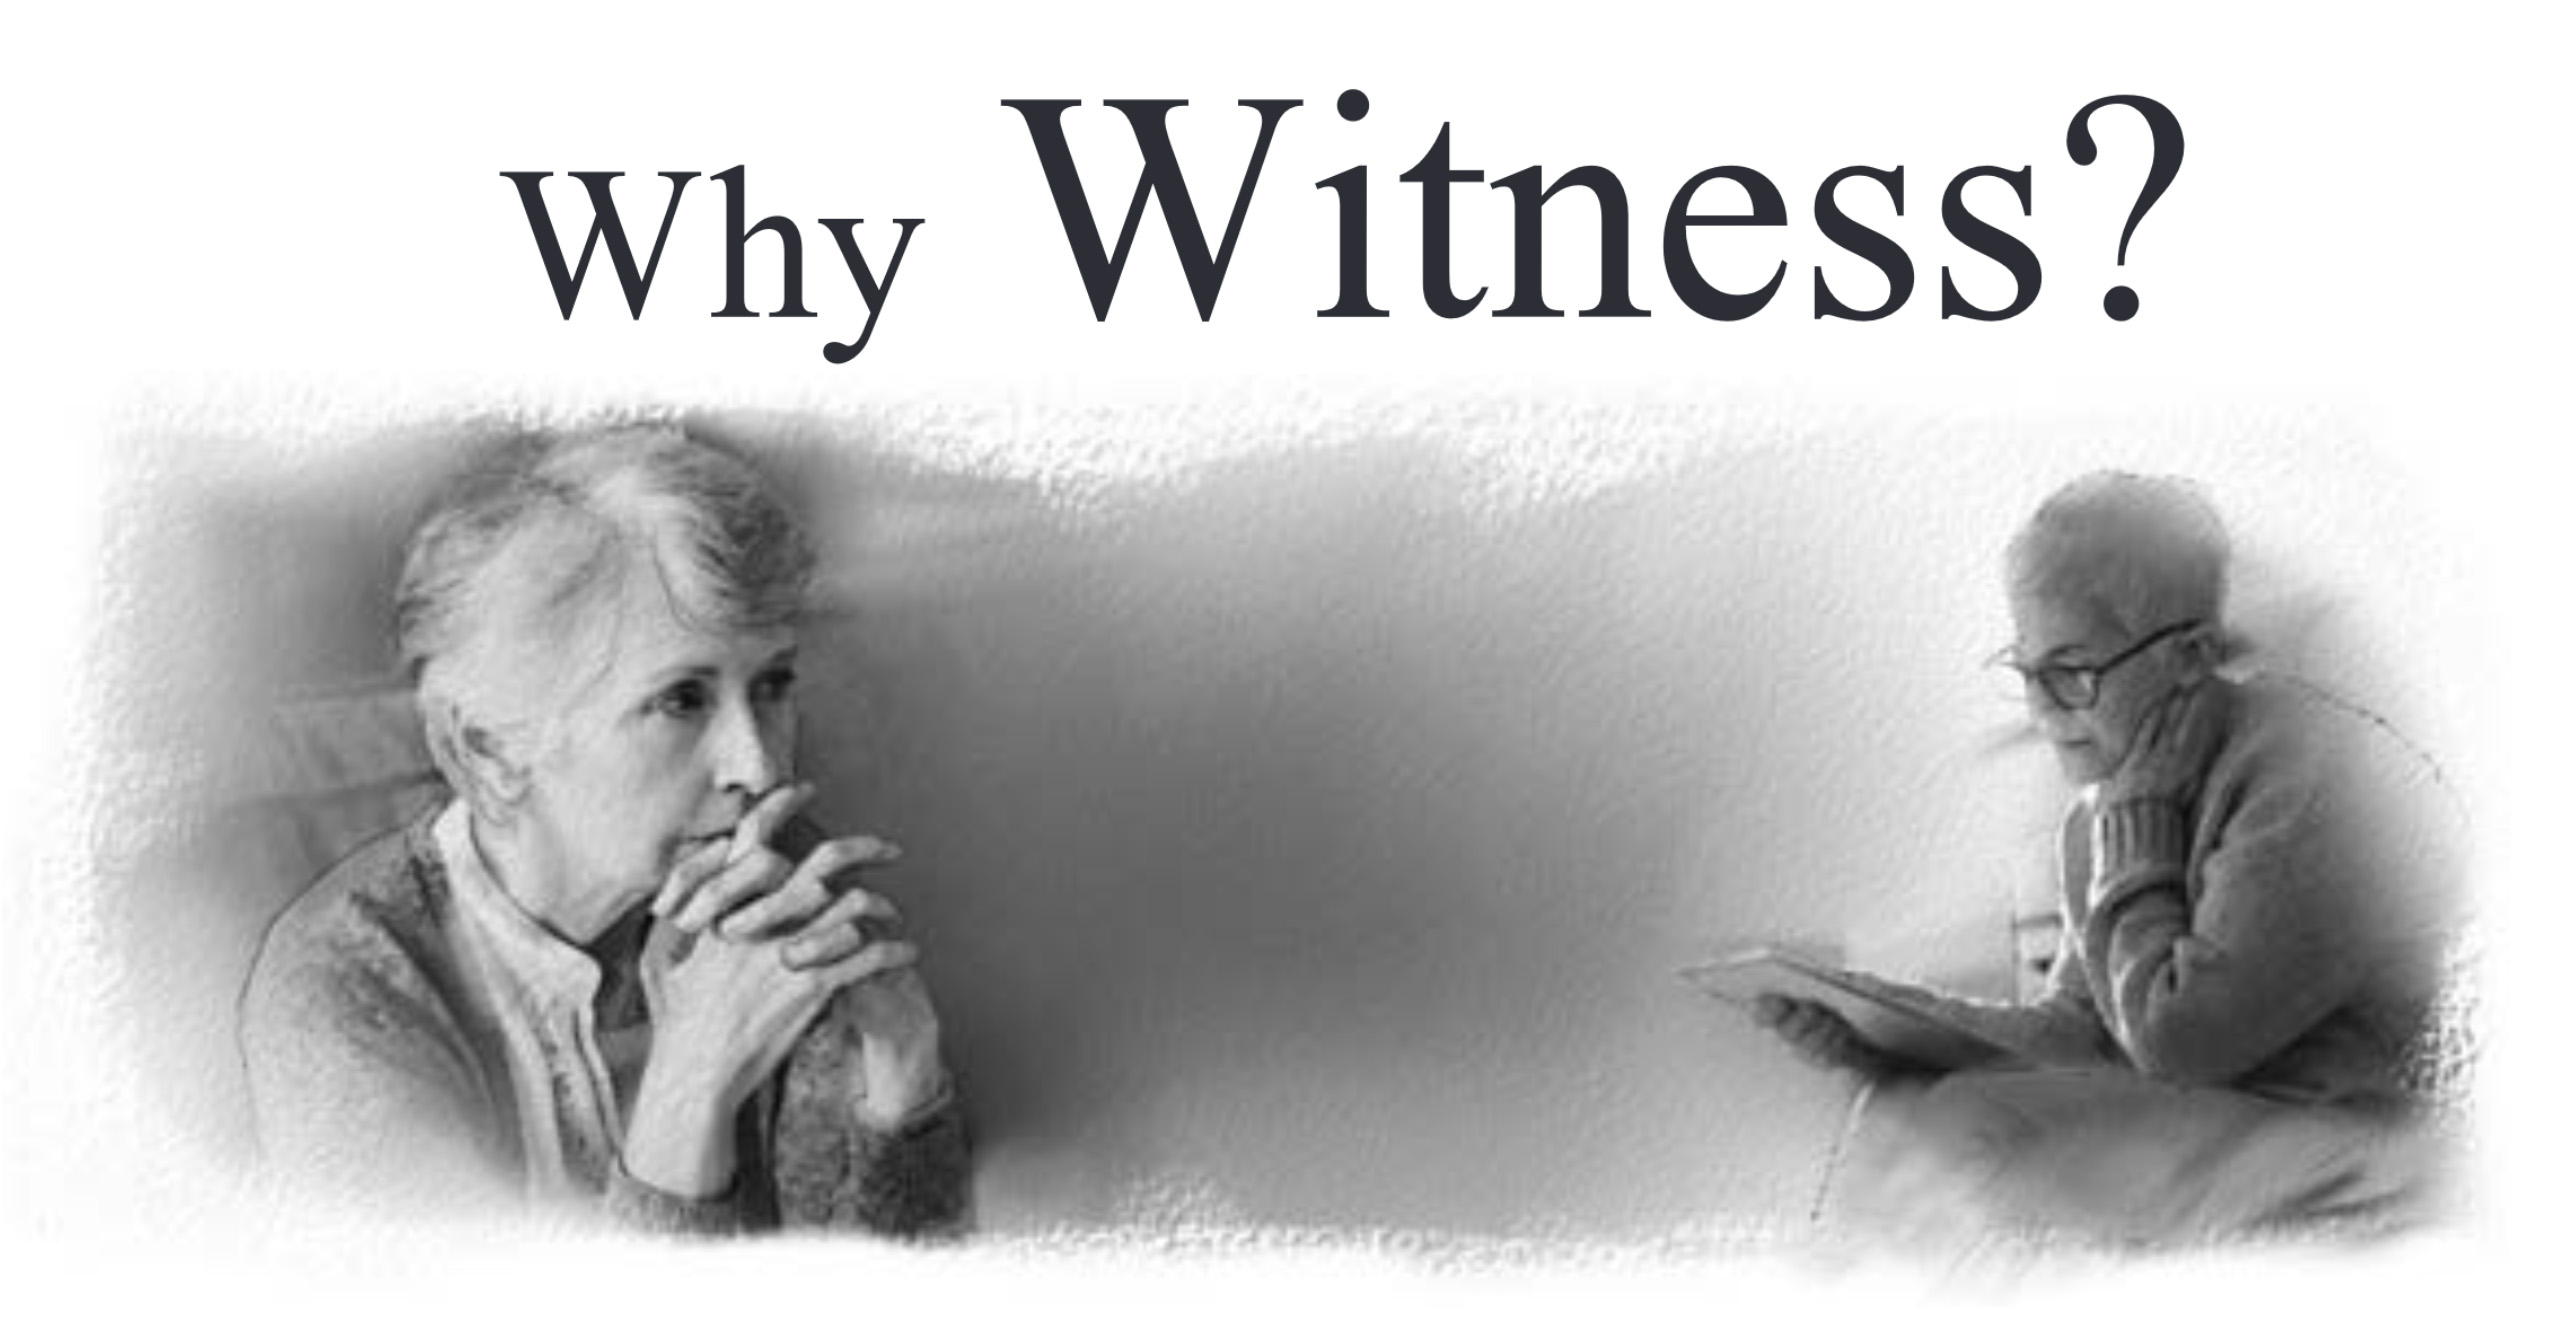 Lesson 1: Why Witness? (3rd Quarter 2020) - Sabbath School Weekly Lesson. Weekly lesson for in-depth Bible study of Word of God.